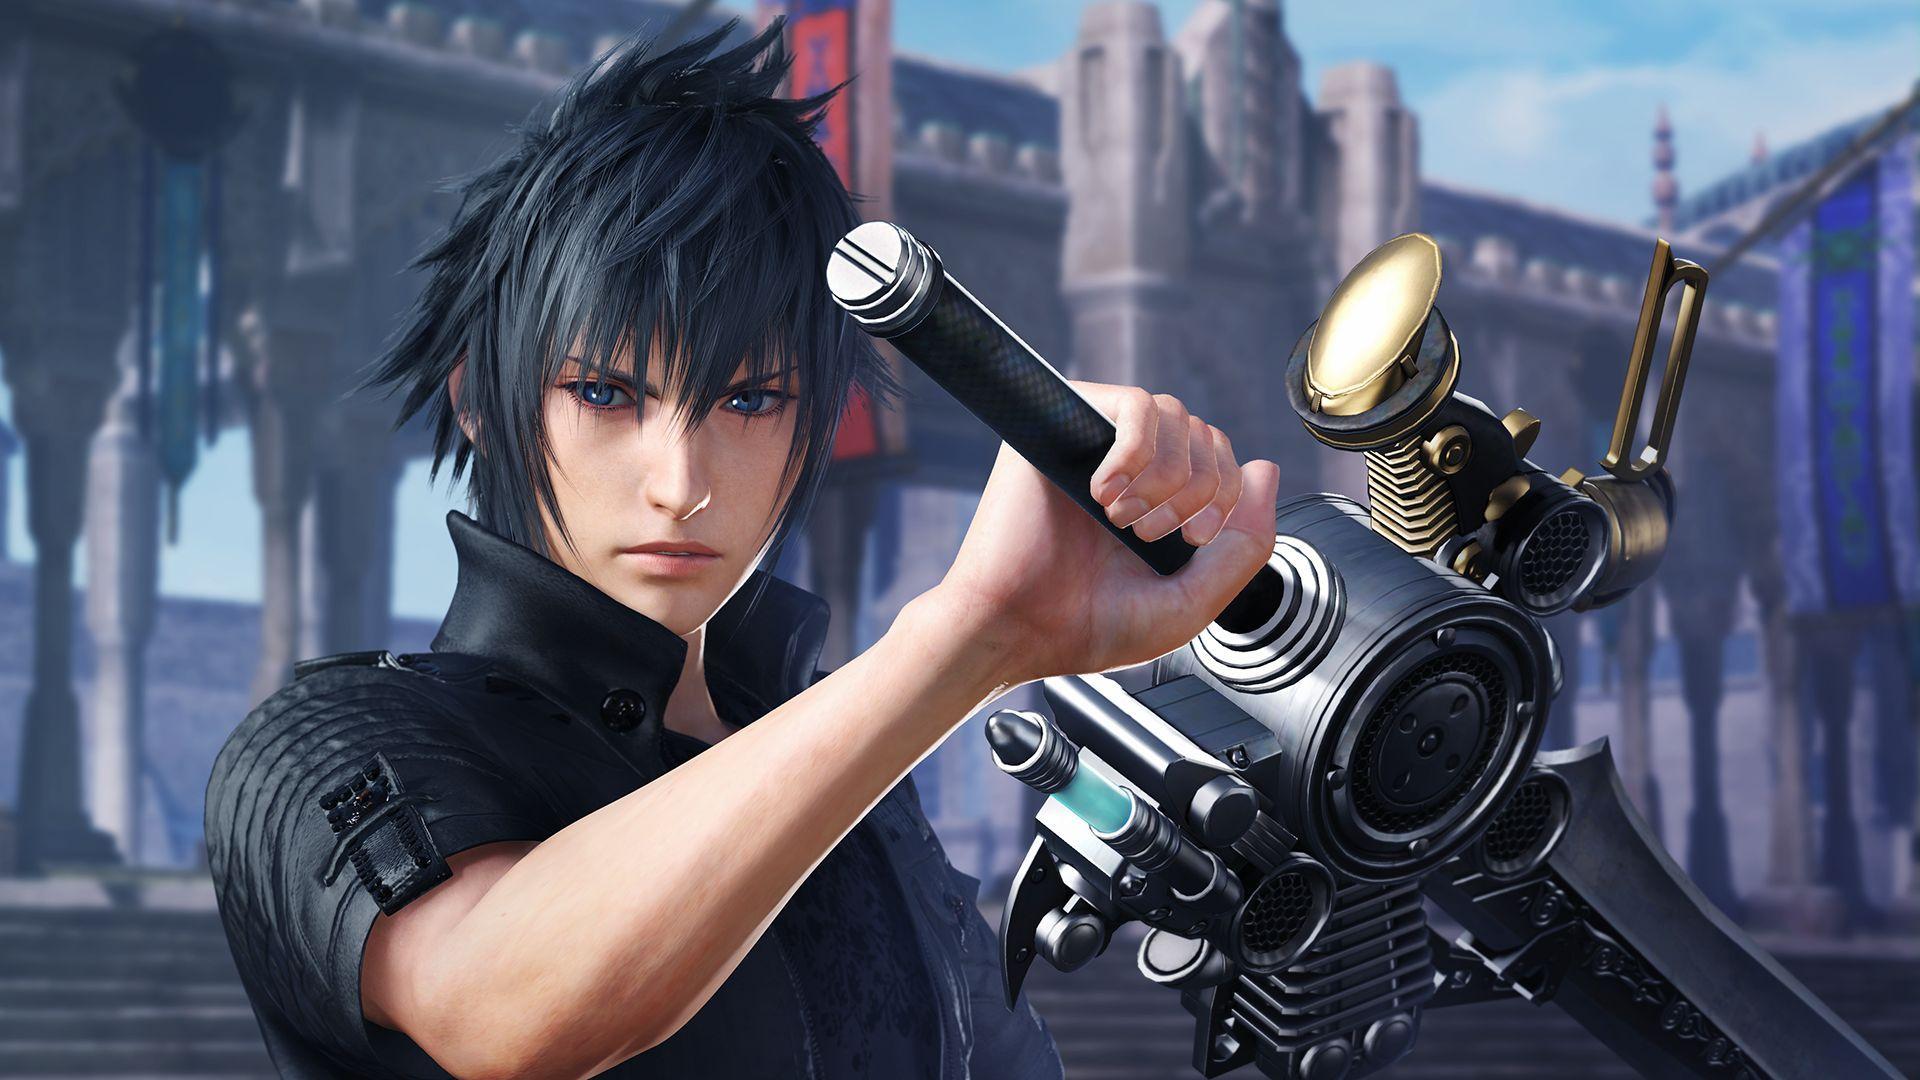 Dissidia Final Fantasy NT Adds Noctis to the Roster; Shown in New